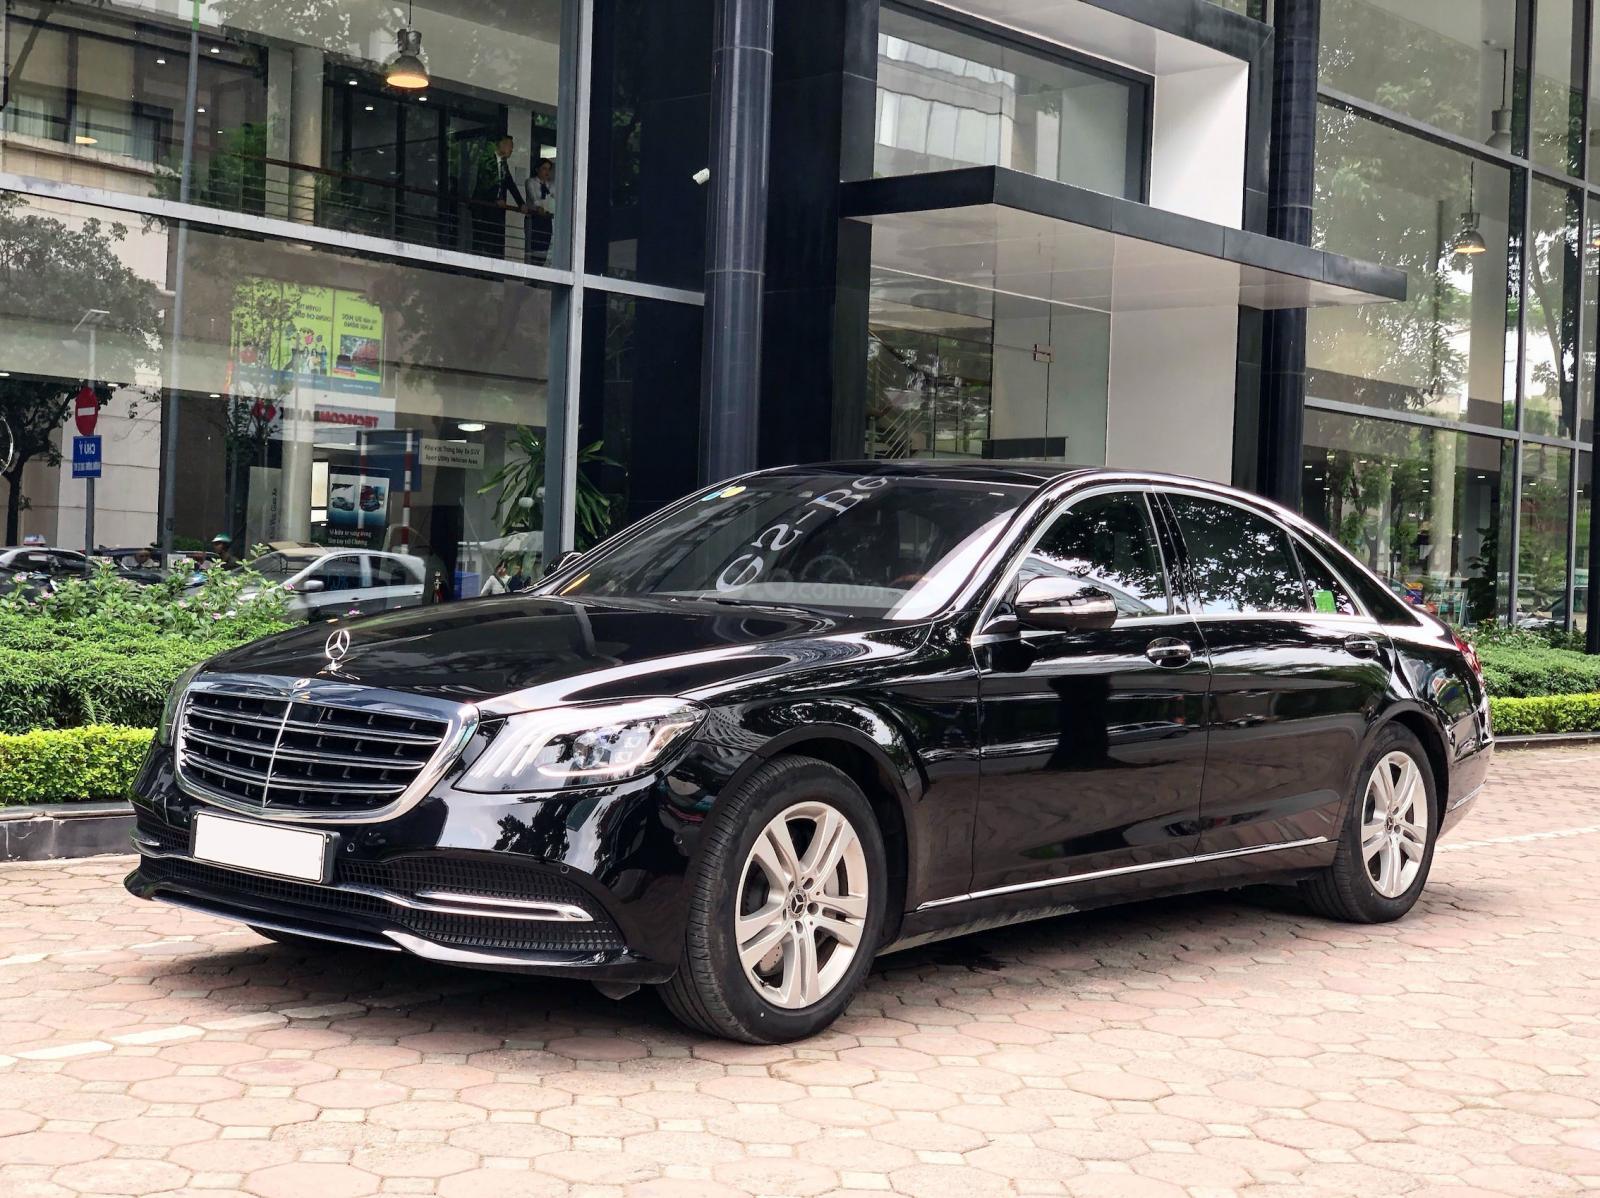 Mercedes s450. Мерседес Бенц s class 450. Мерседес s450 2021. Мерседес s450 Майбах.